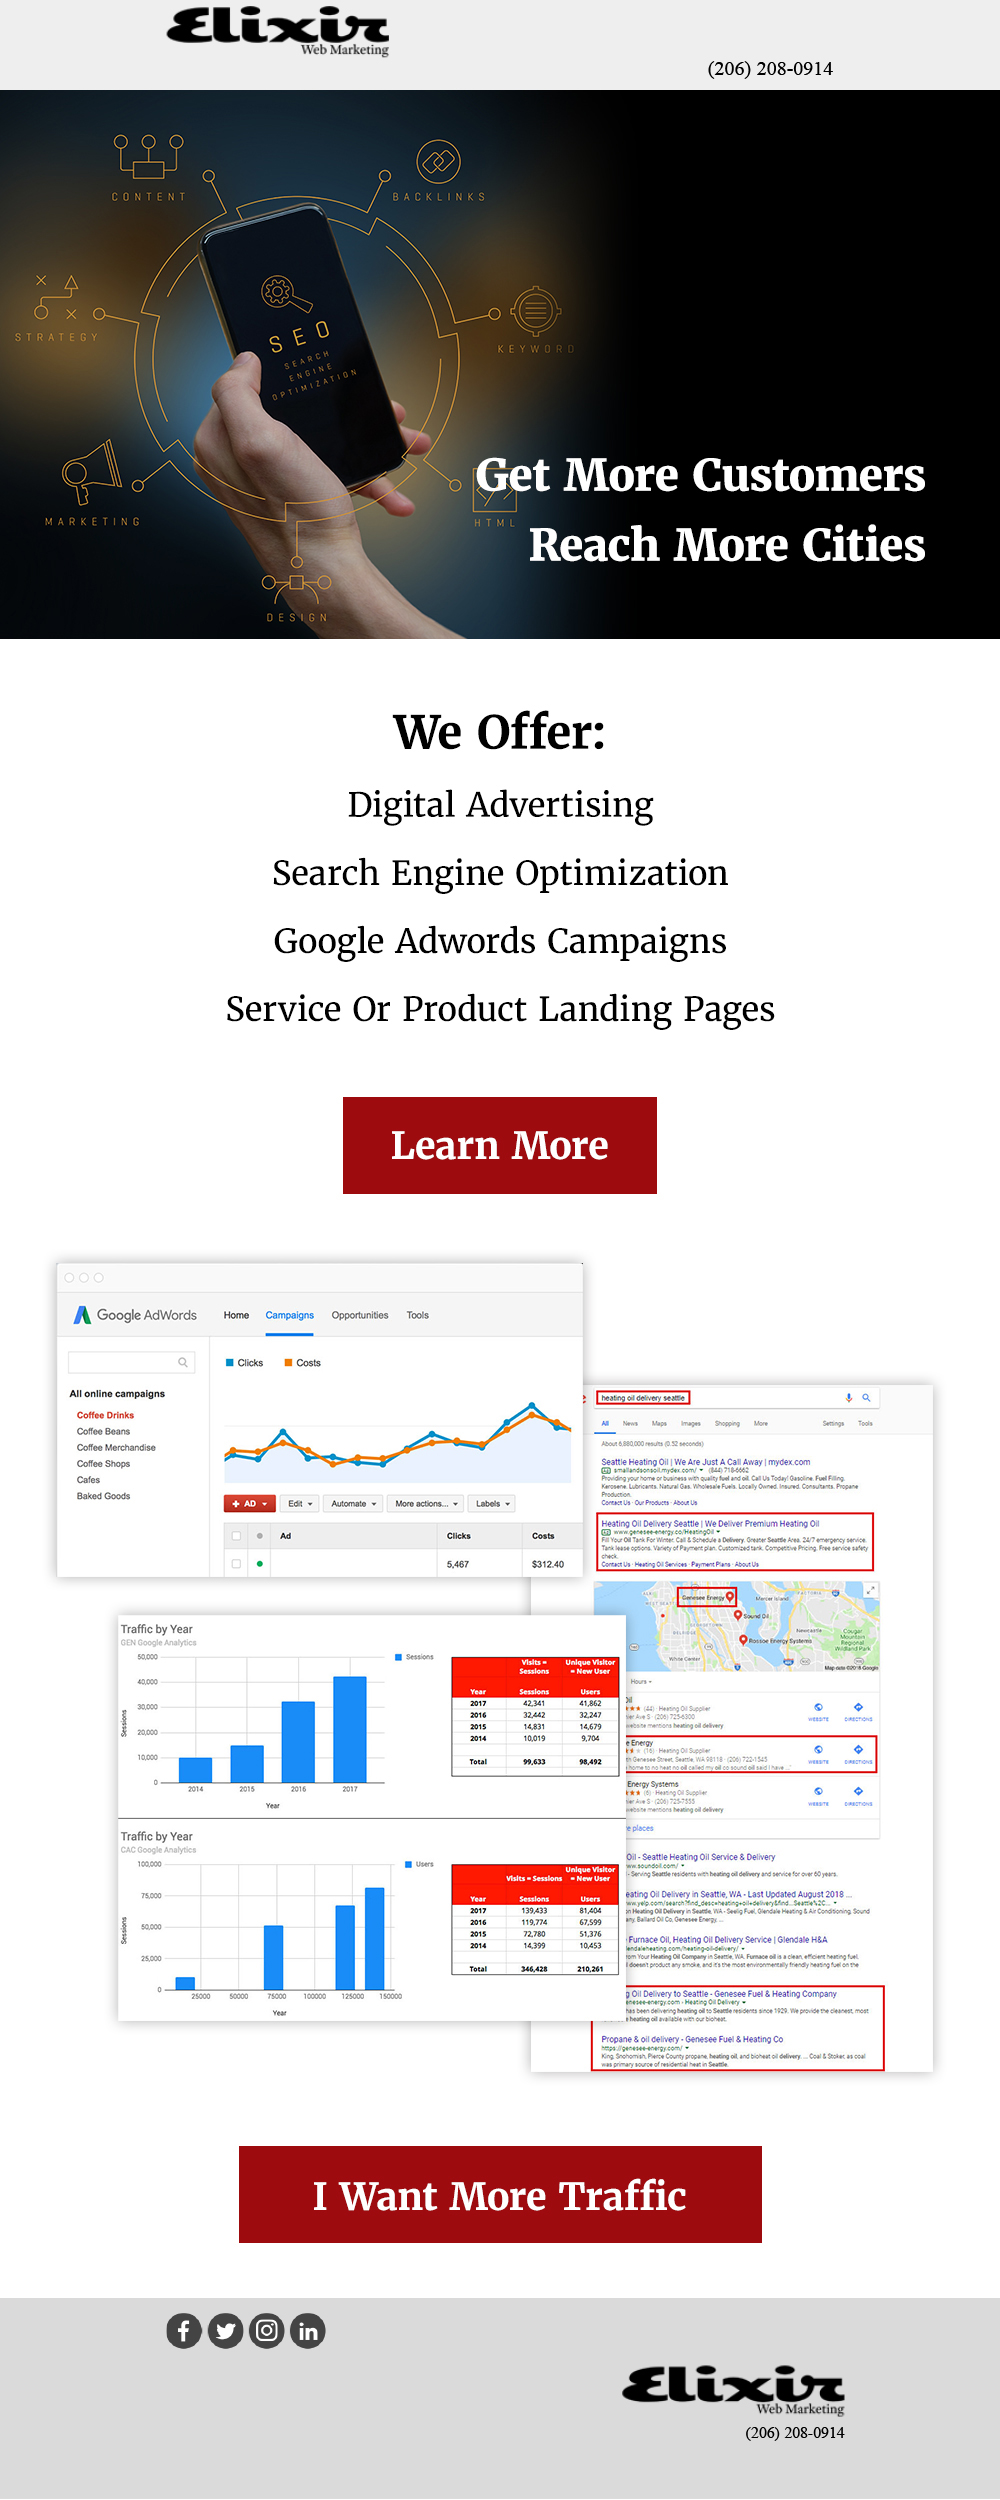 Email marketing newsletter about digital advertising and SEO. Images with growth charts and link to learn more.